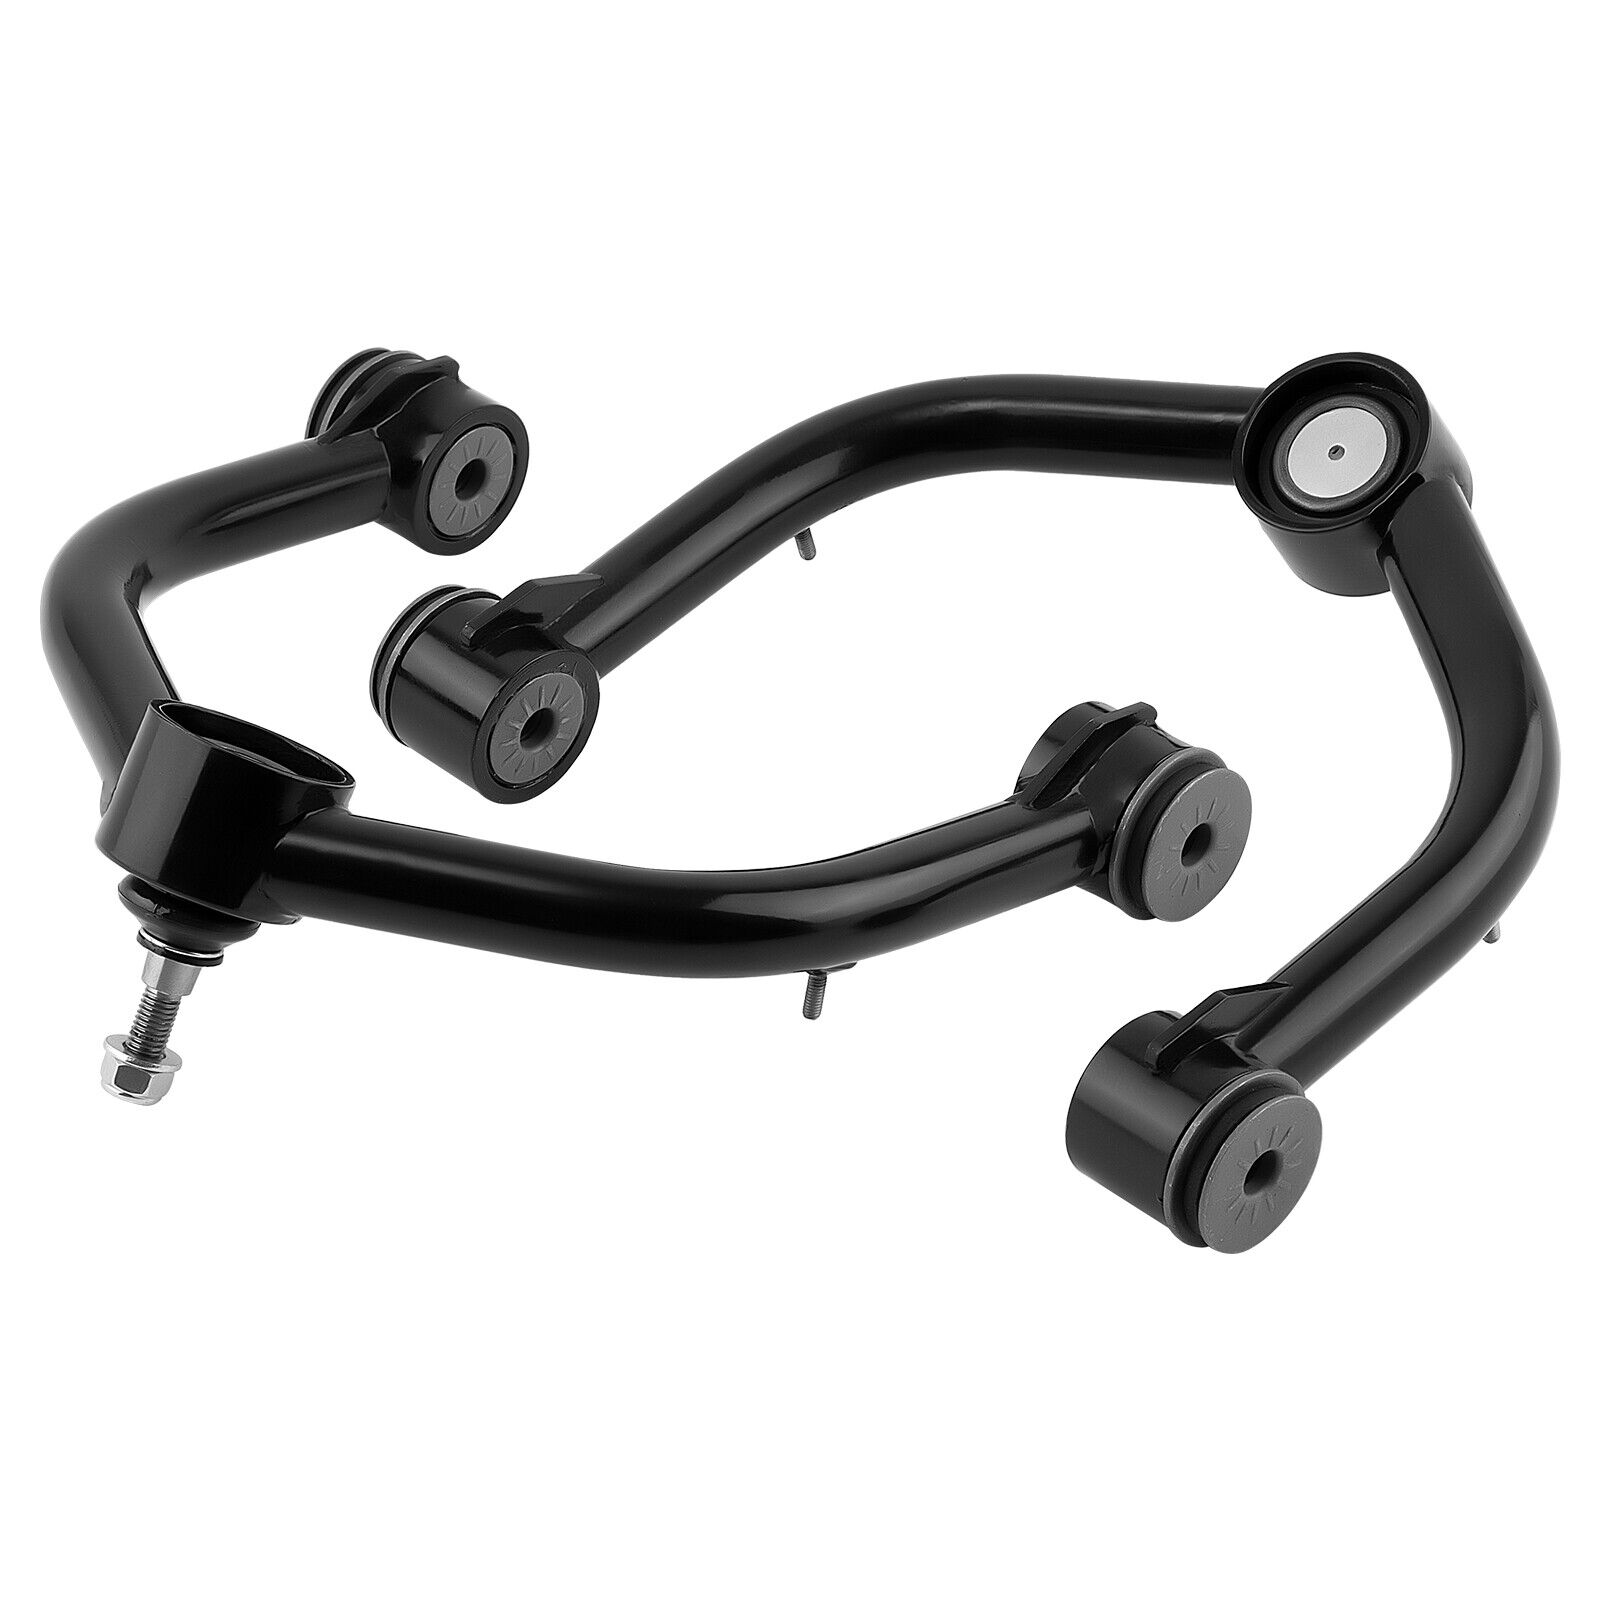 2-4 inch Lift Front Upper Control Arms for 1999-2006 Chevy Silverado GMC Sierra